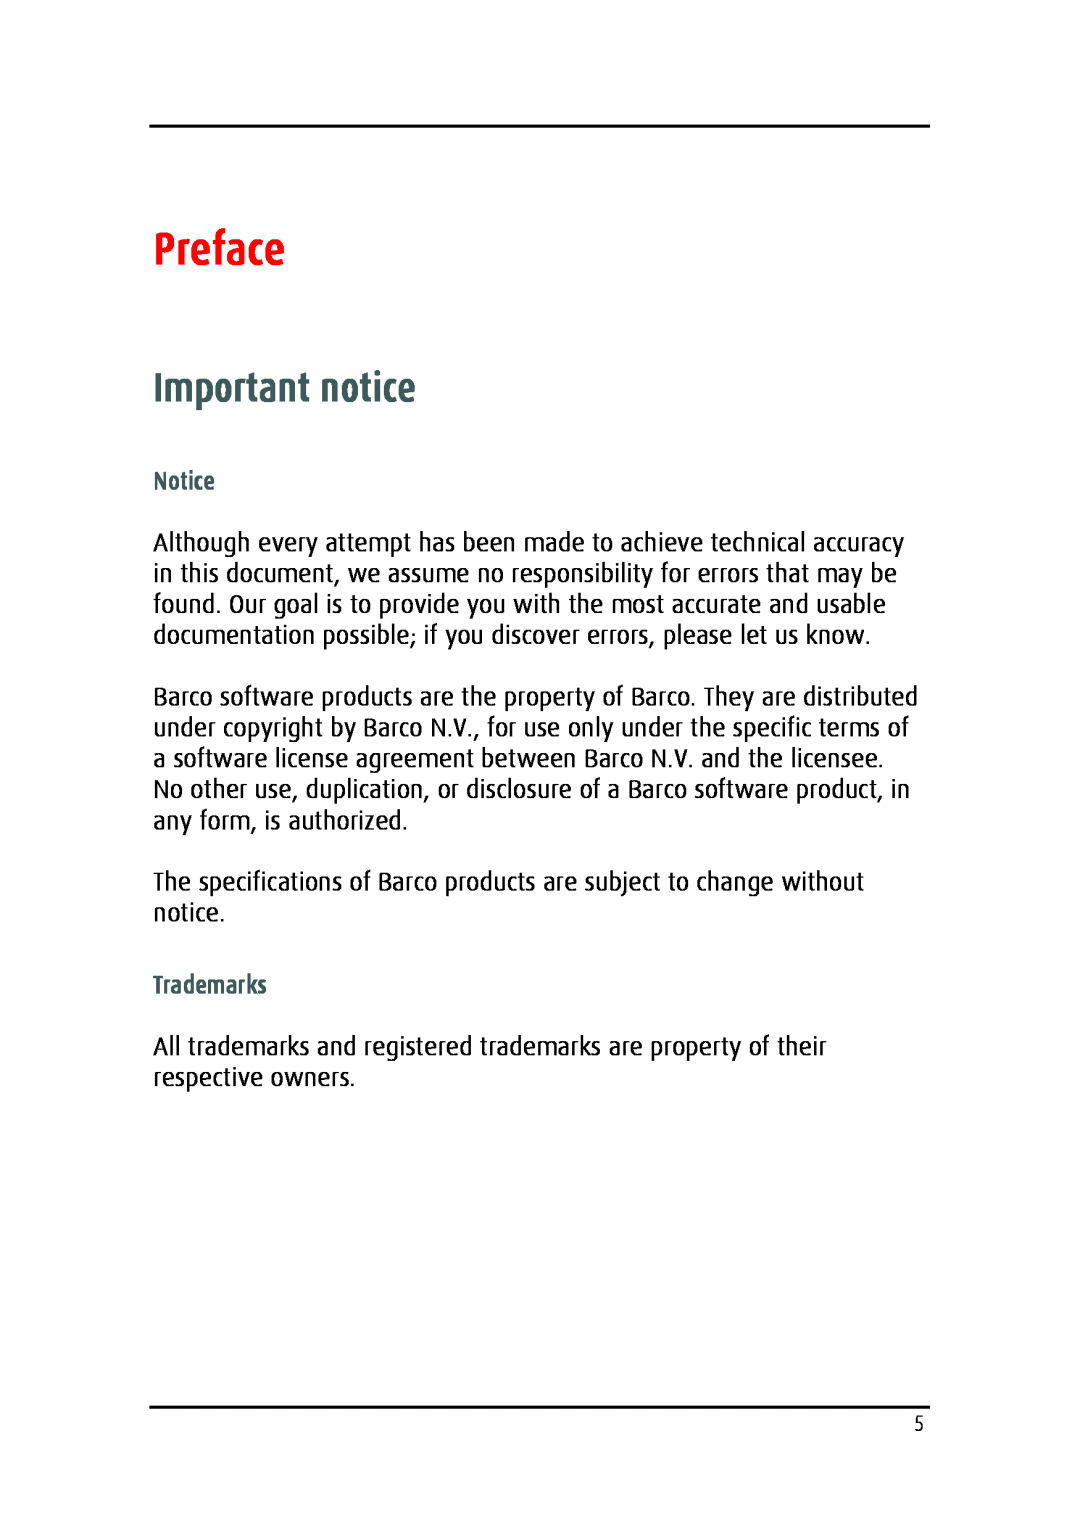 Barco MDRC-2124 user manual Preface, Important notice, Trademarks 